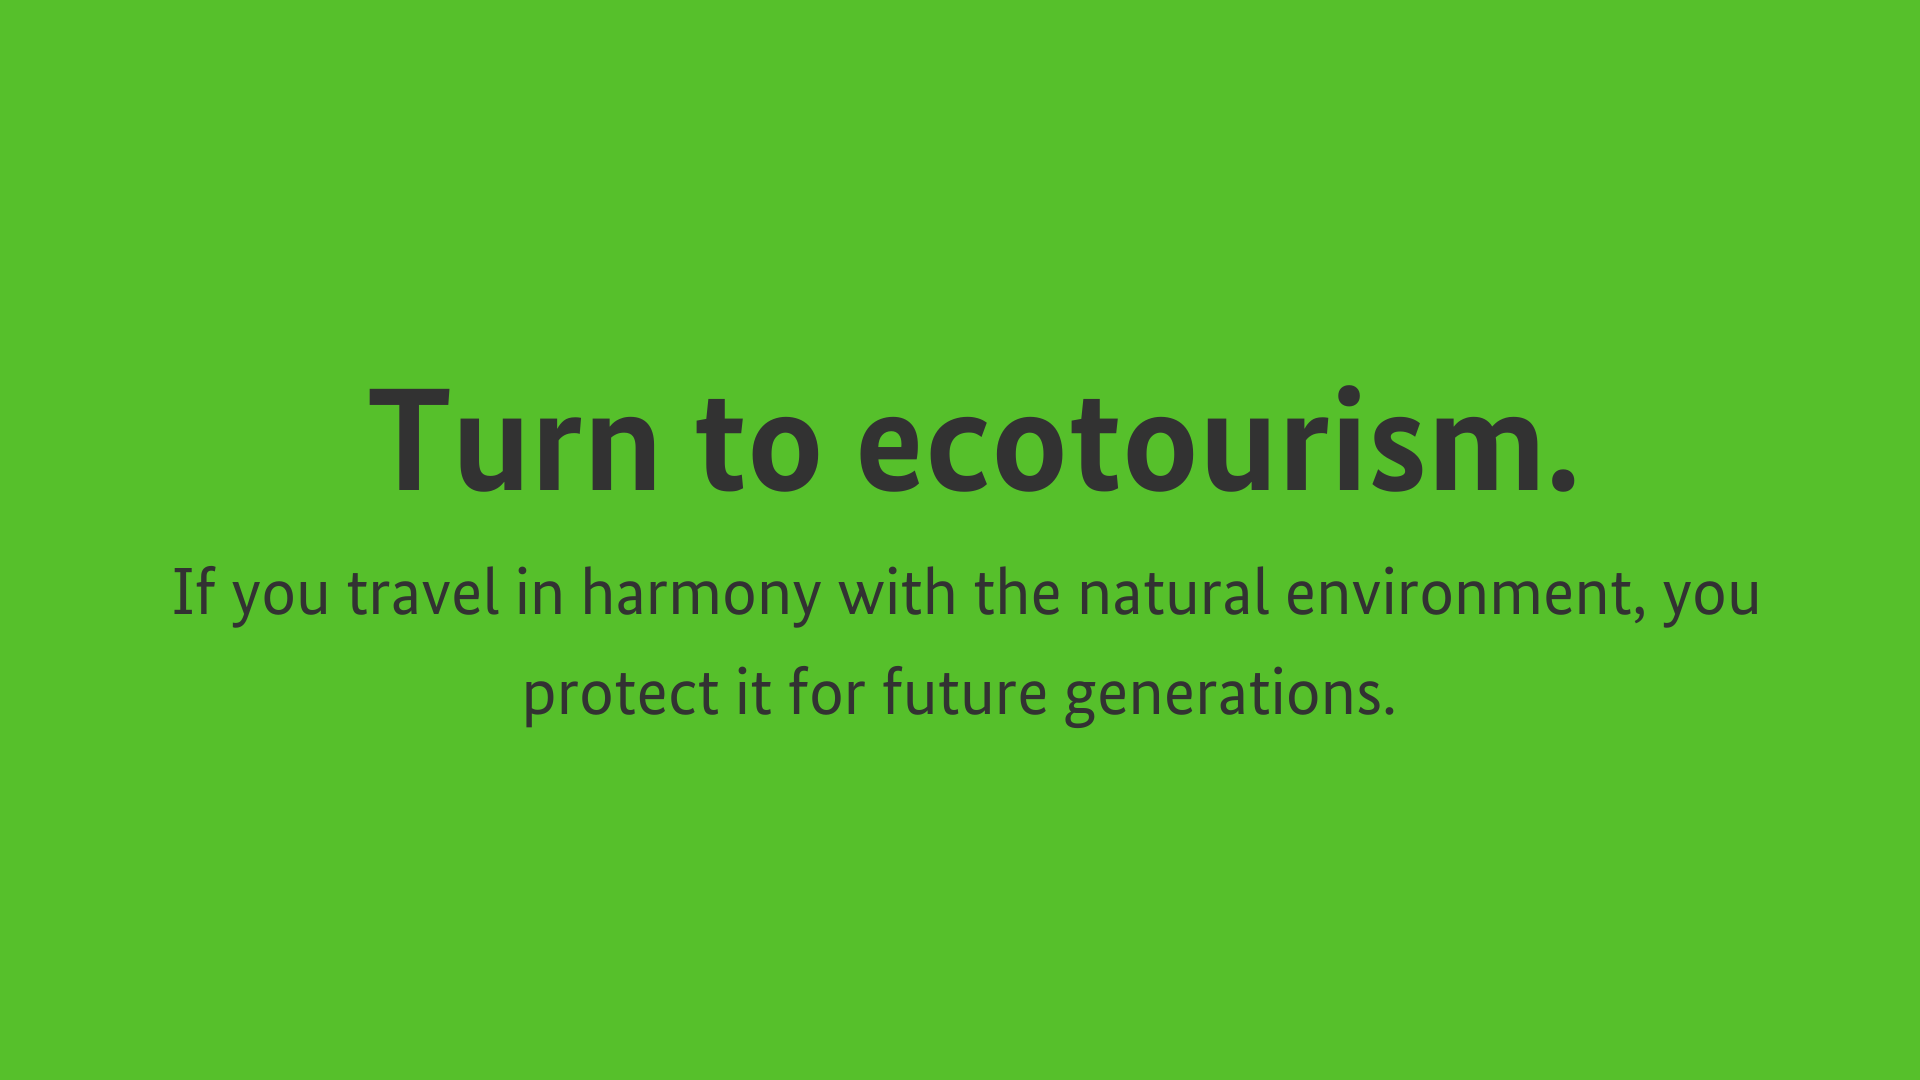 Turn to ecotourism. If you travel in harmony with the natural environment, you protect it for future generations.